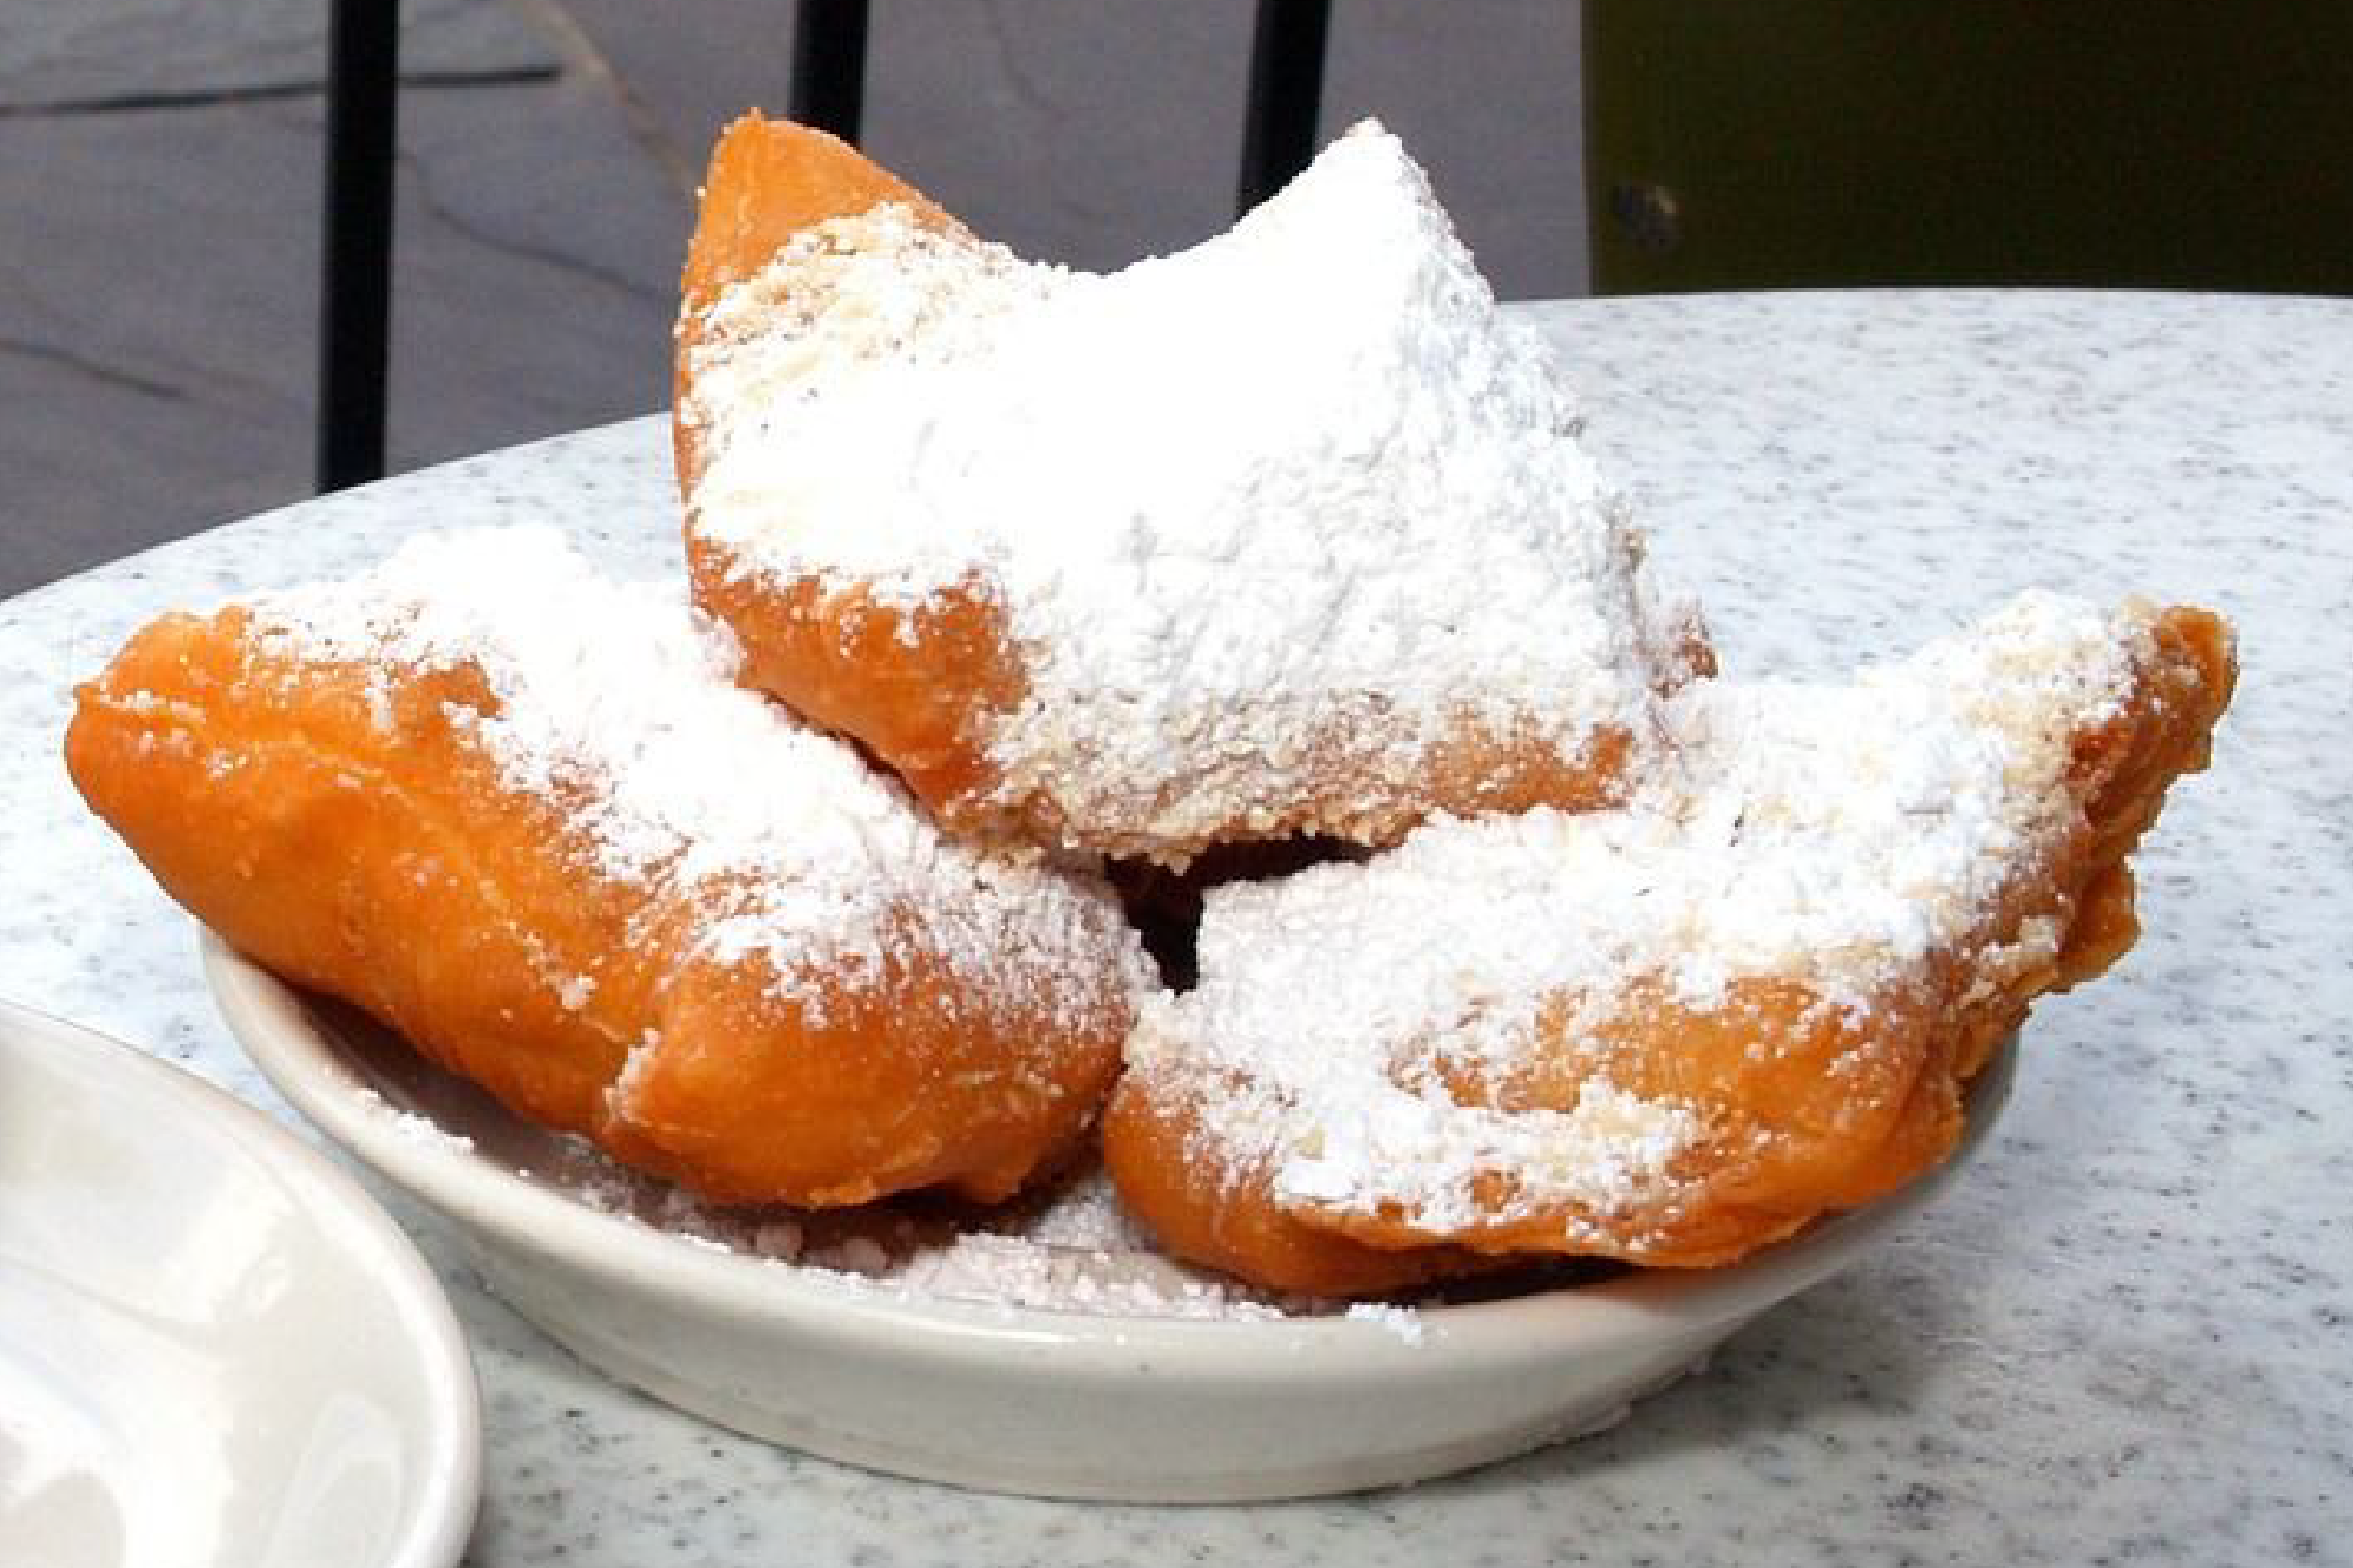 beignets on a plate